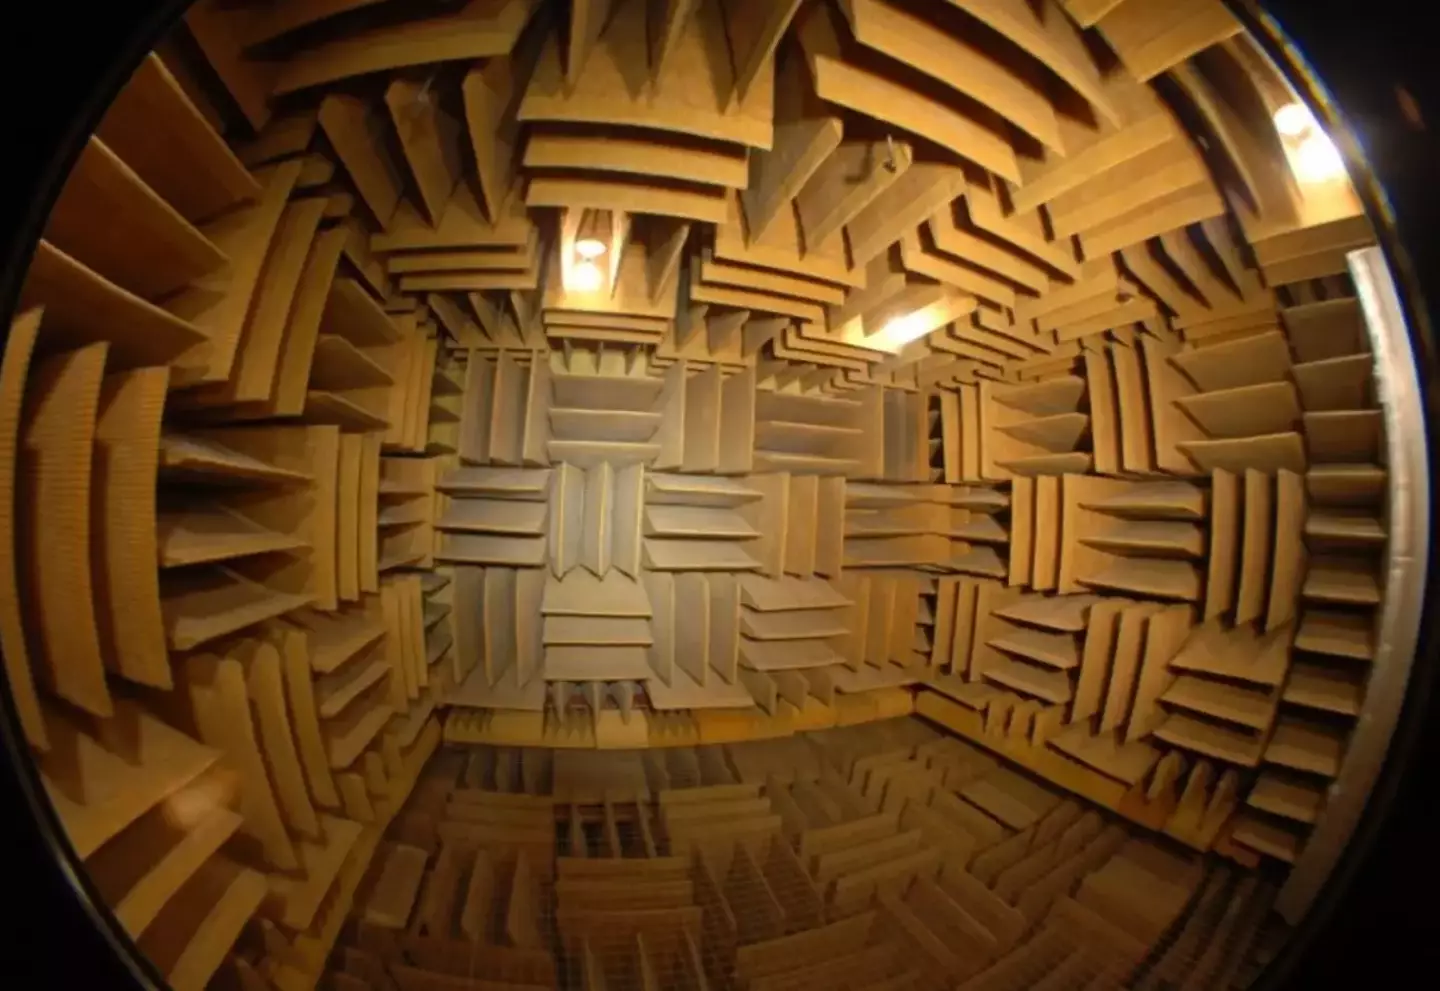 The world's quietest room is located in Minnesota.